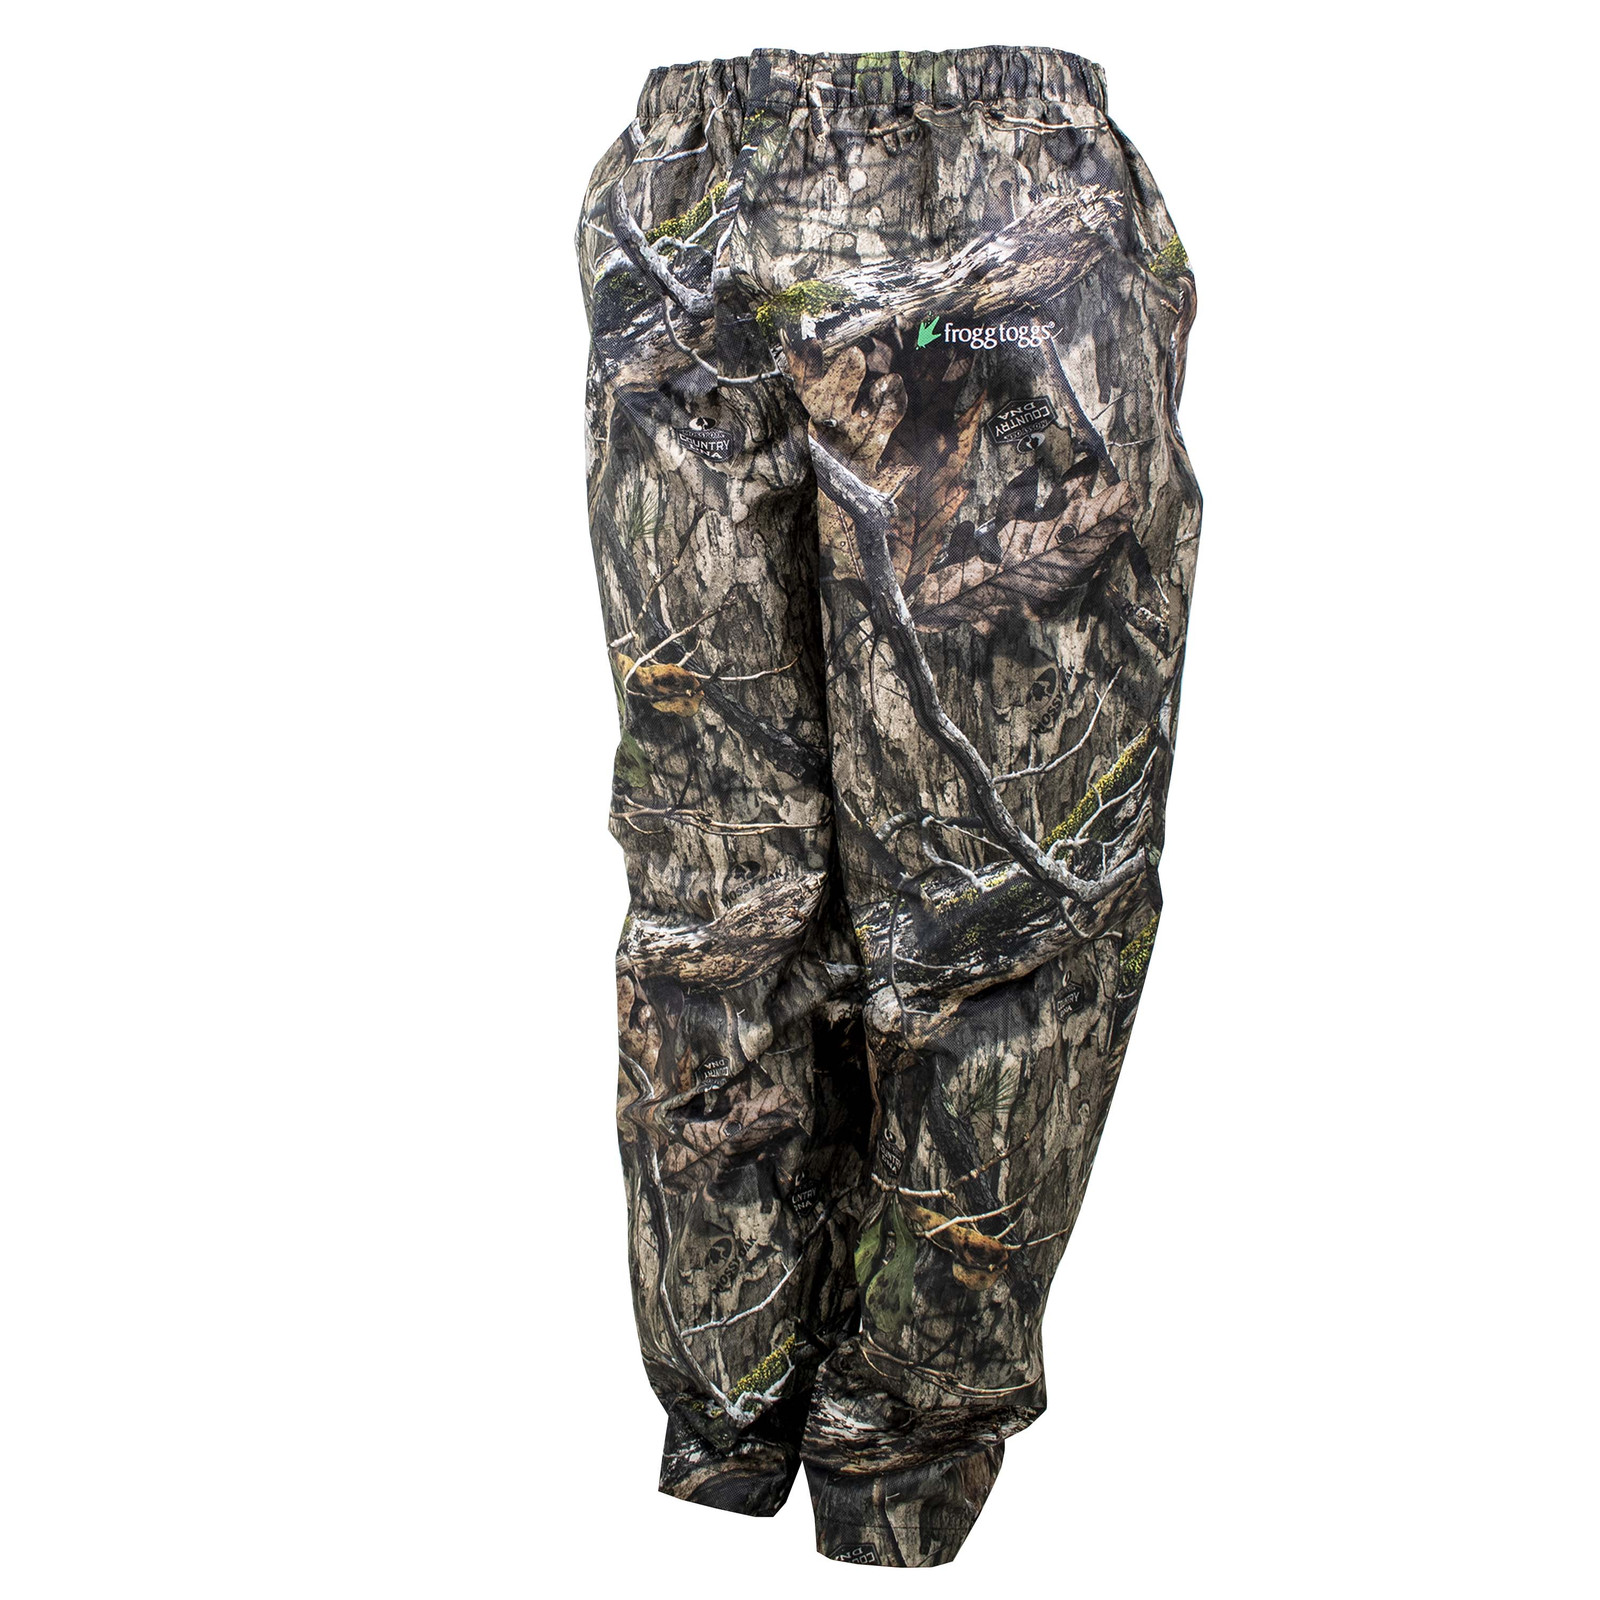 frogg toggs® All Sport Rain Suit pants